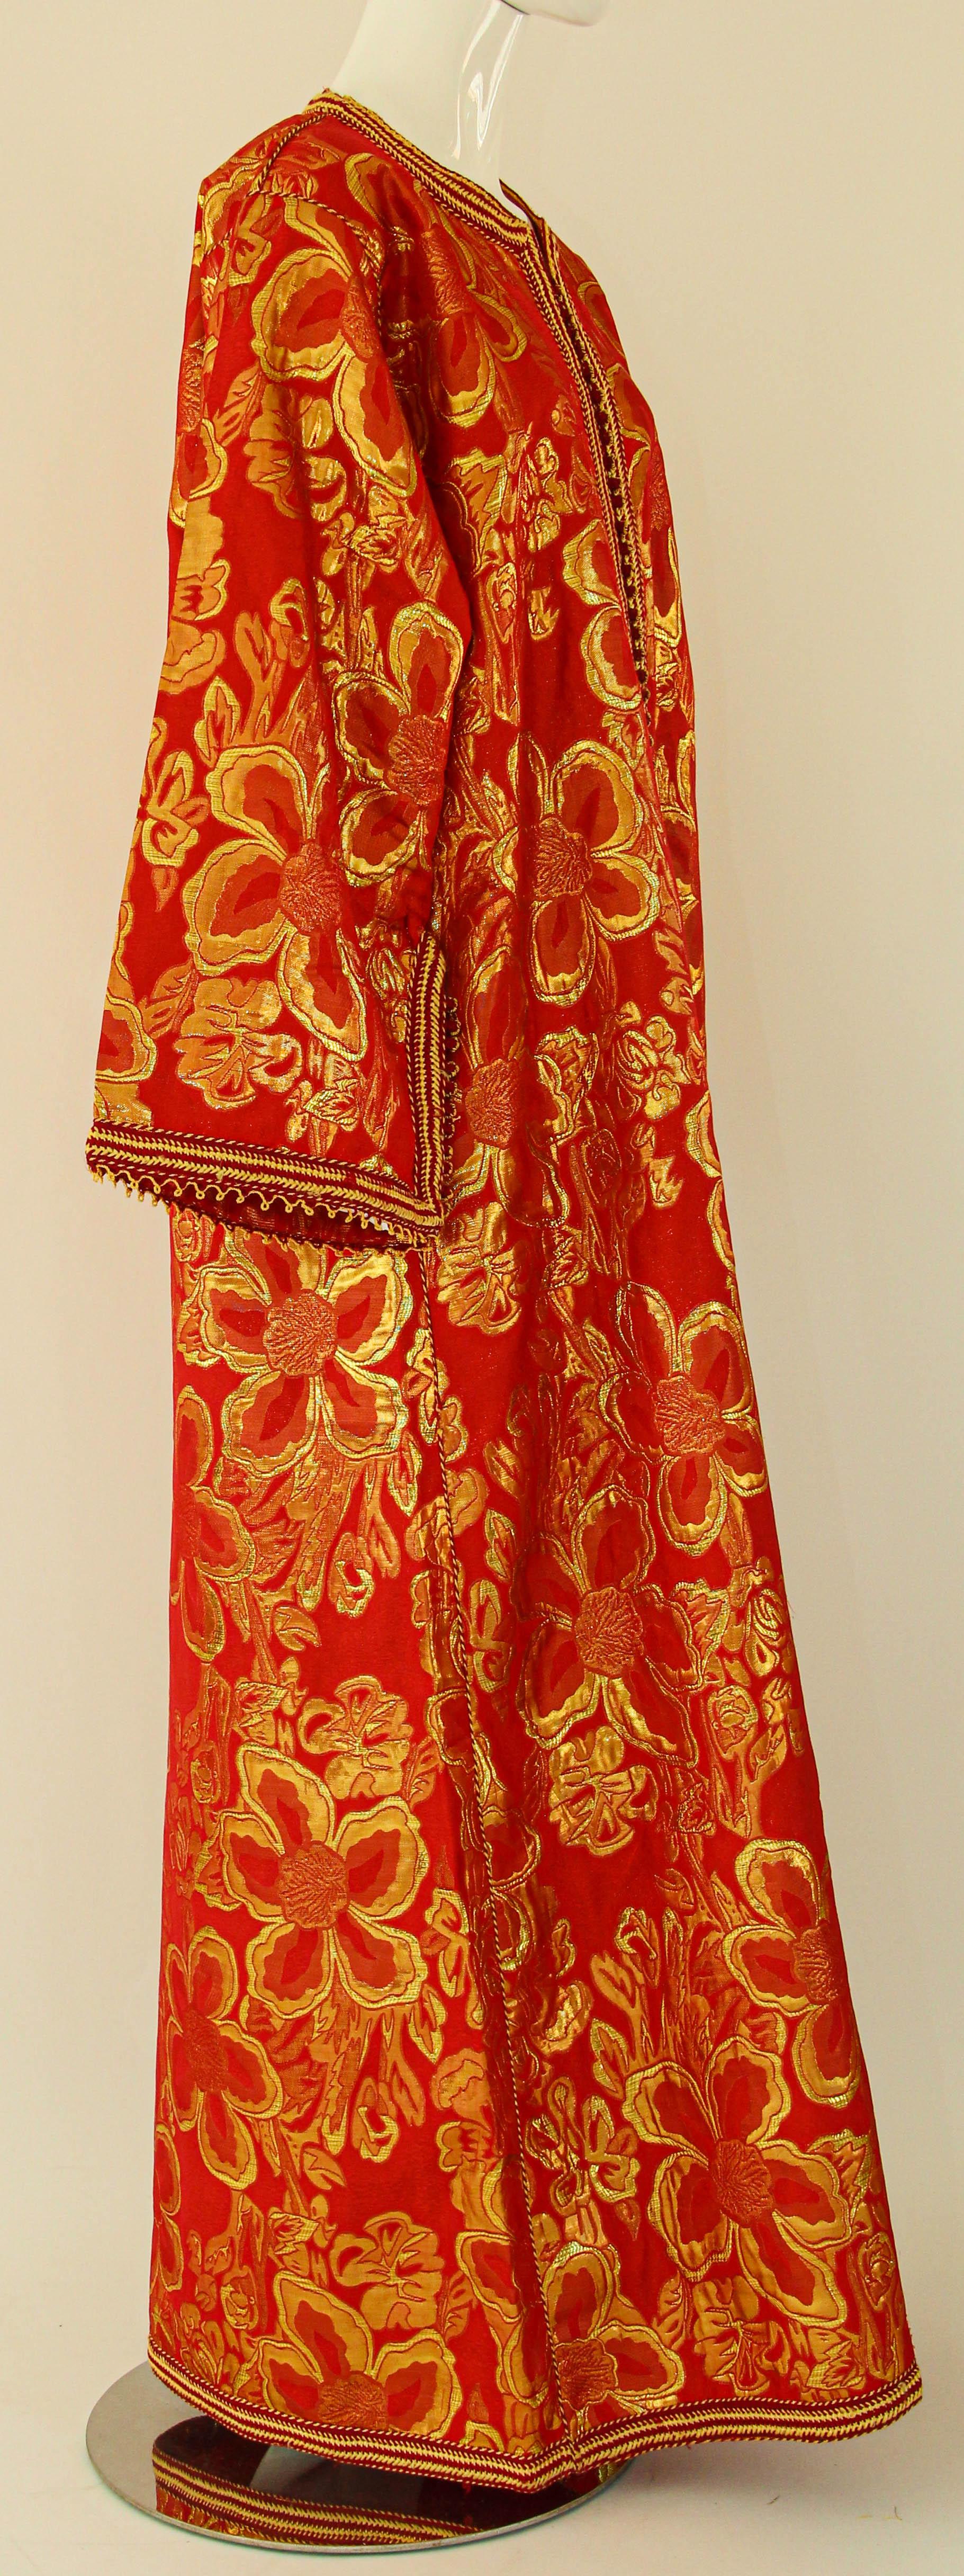 1970s Vintage Moroccan Kaftan Red and Gold Brocade Caftan Maxi Dress For Sale 8